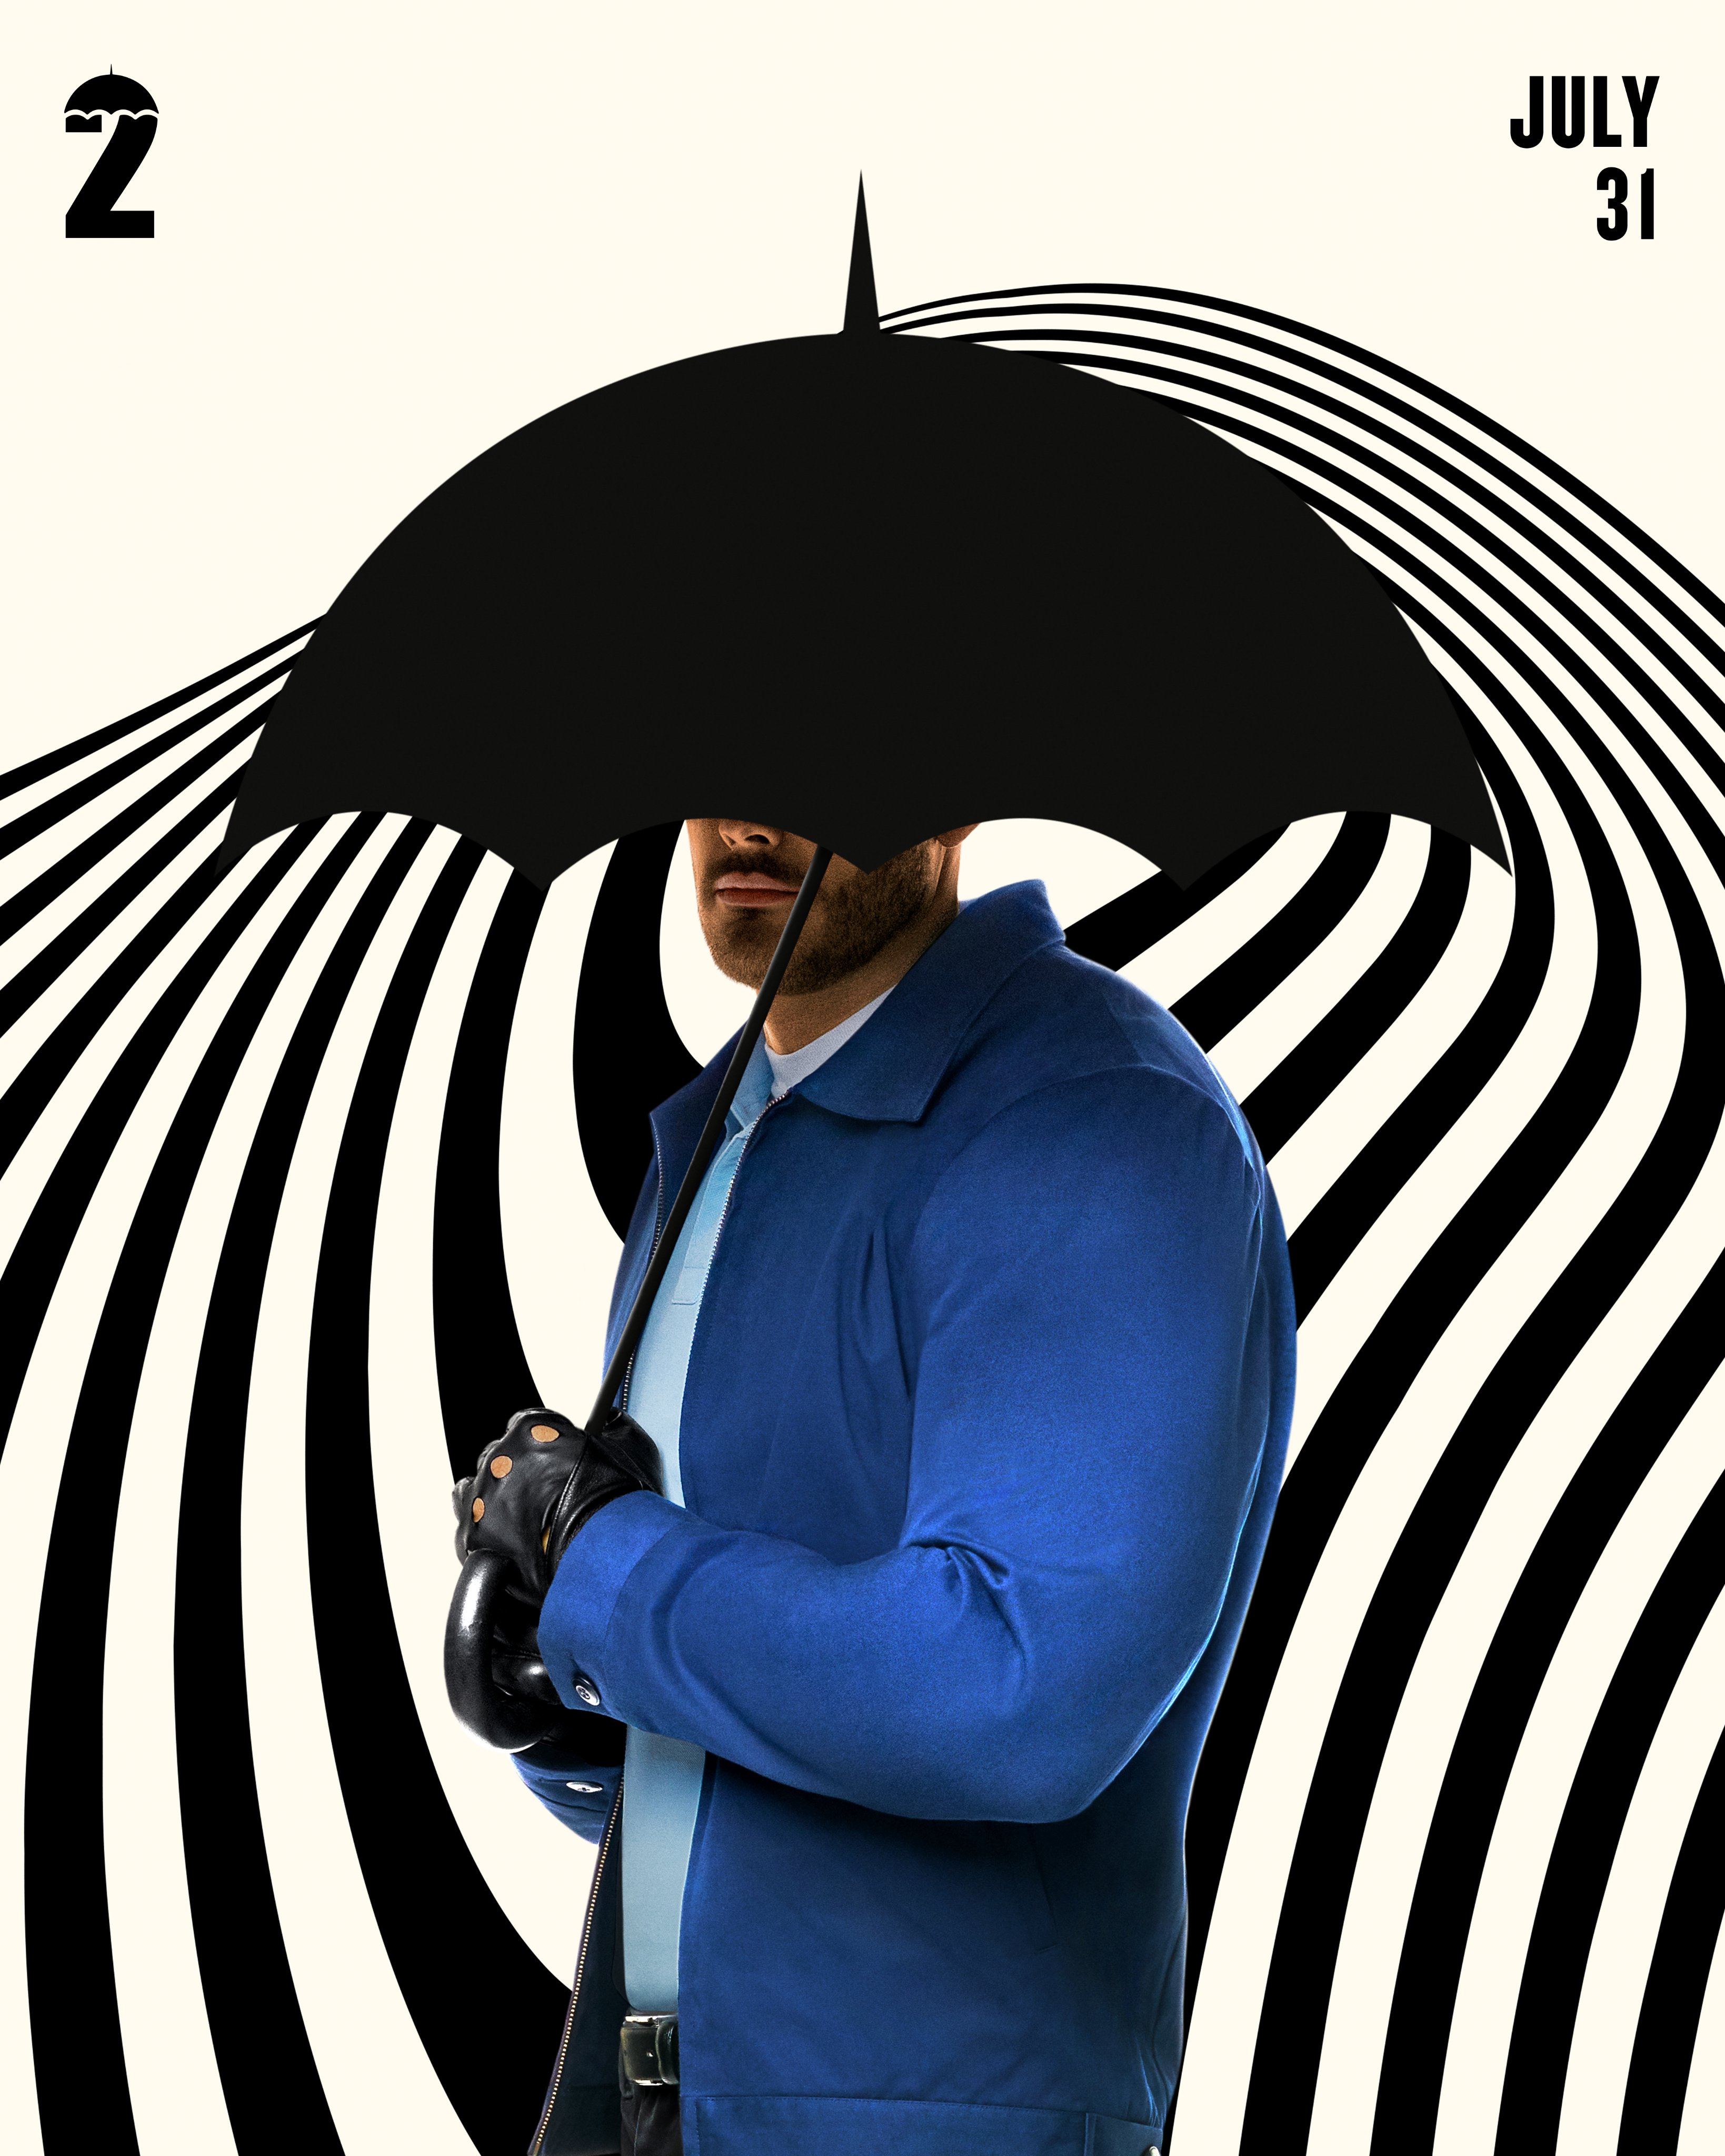 Tom Hopper as Luther Hargreeves in The Umbrella Academy - Season 2 Poster